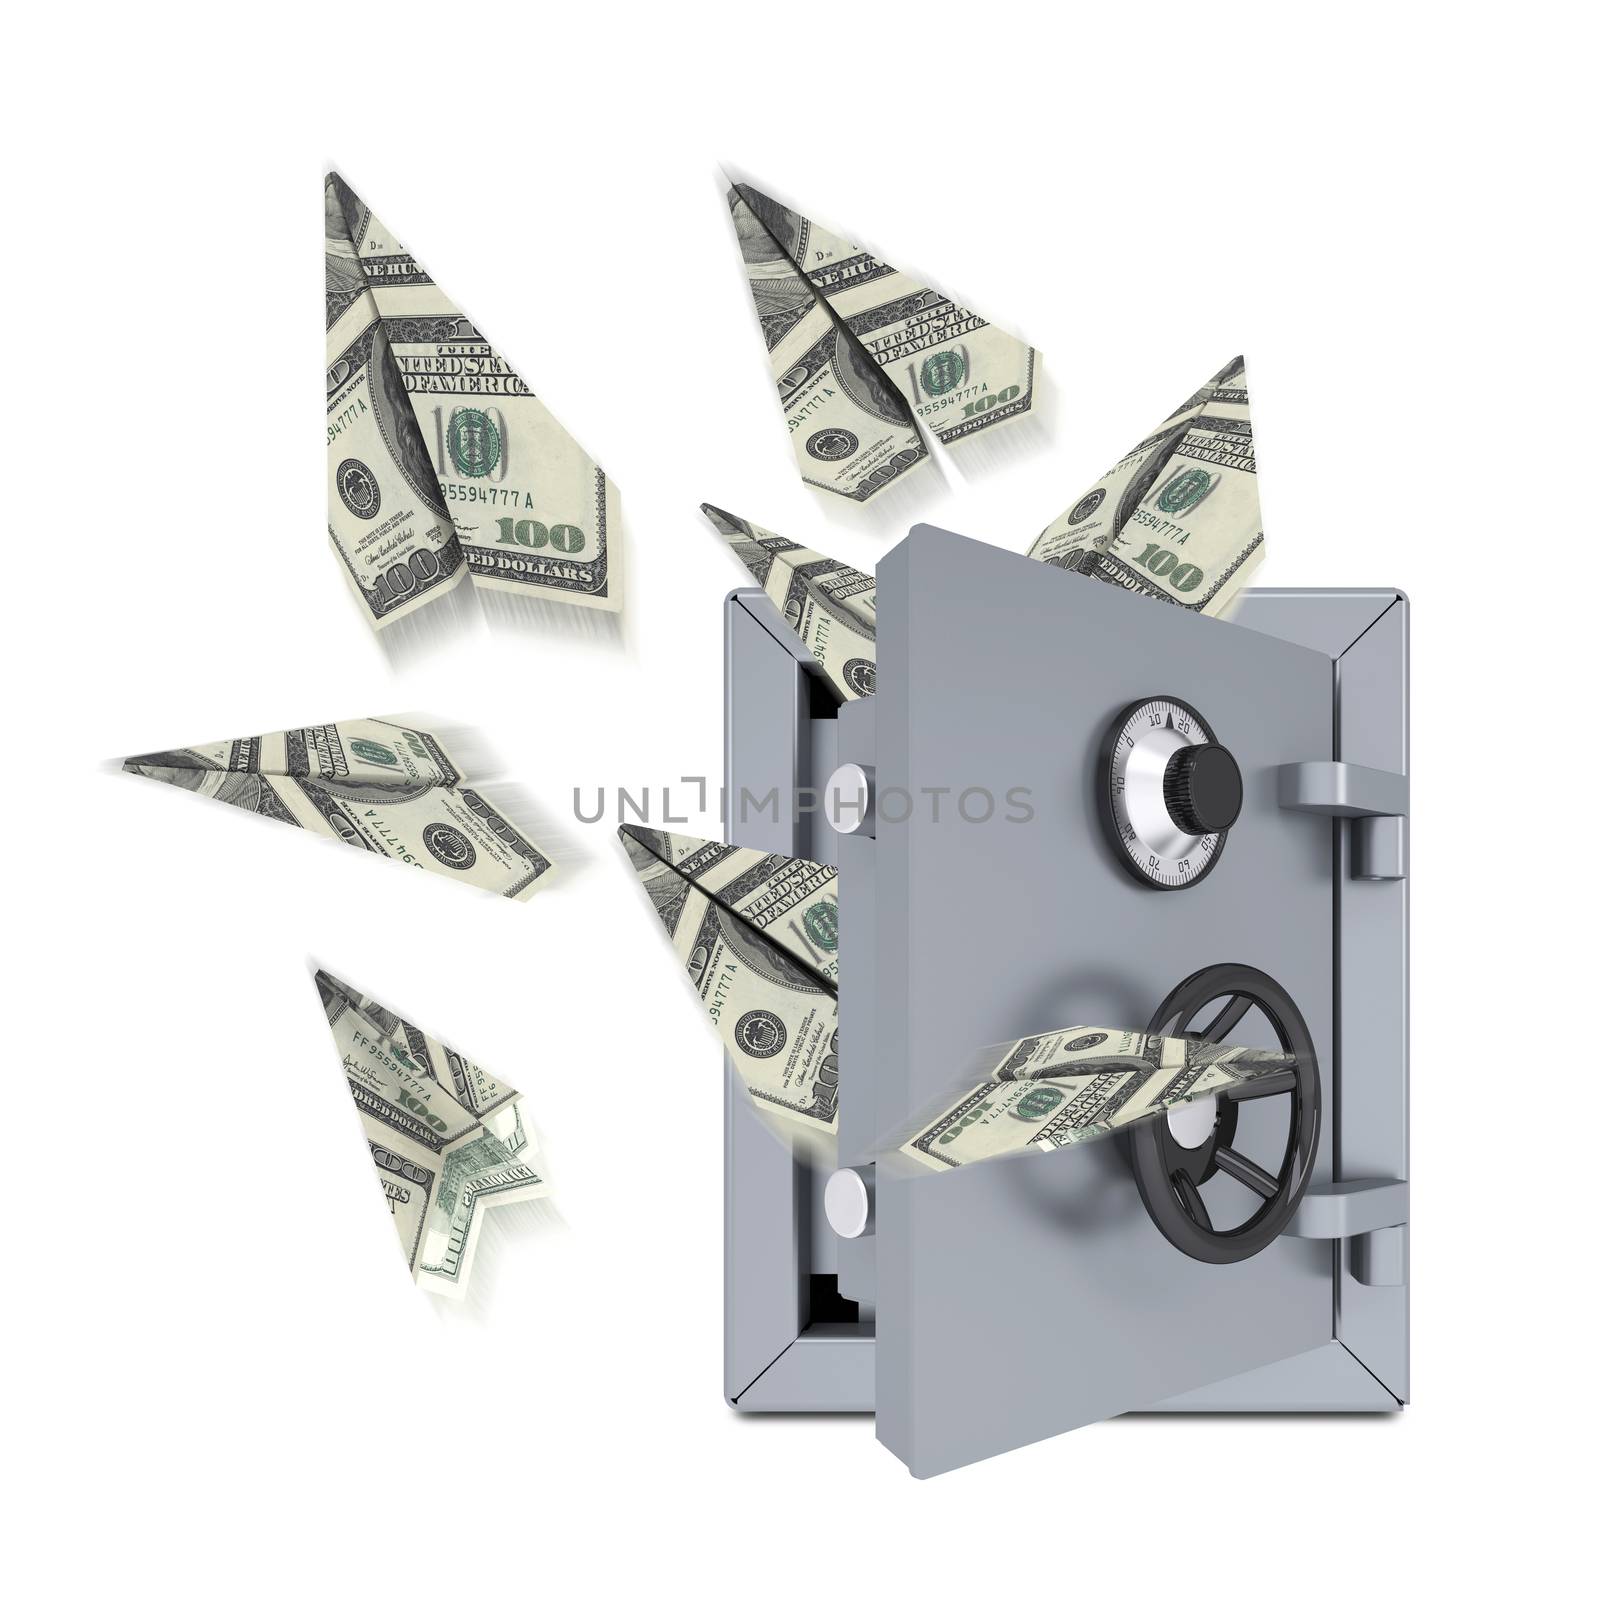 Paper airplanes of dollars from an open safe. Isolated on white background